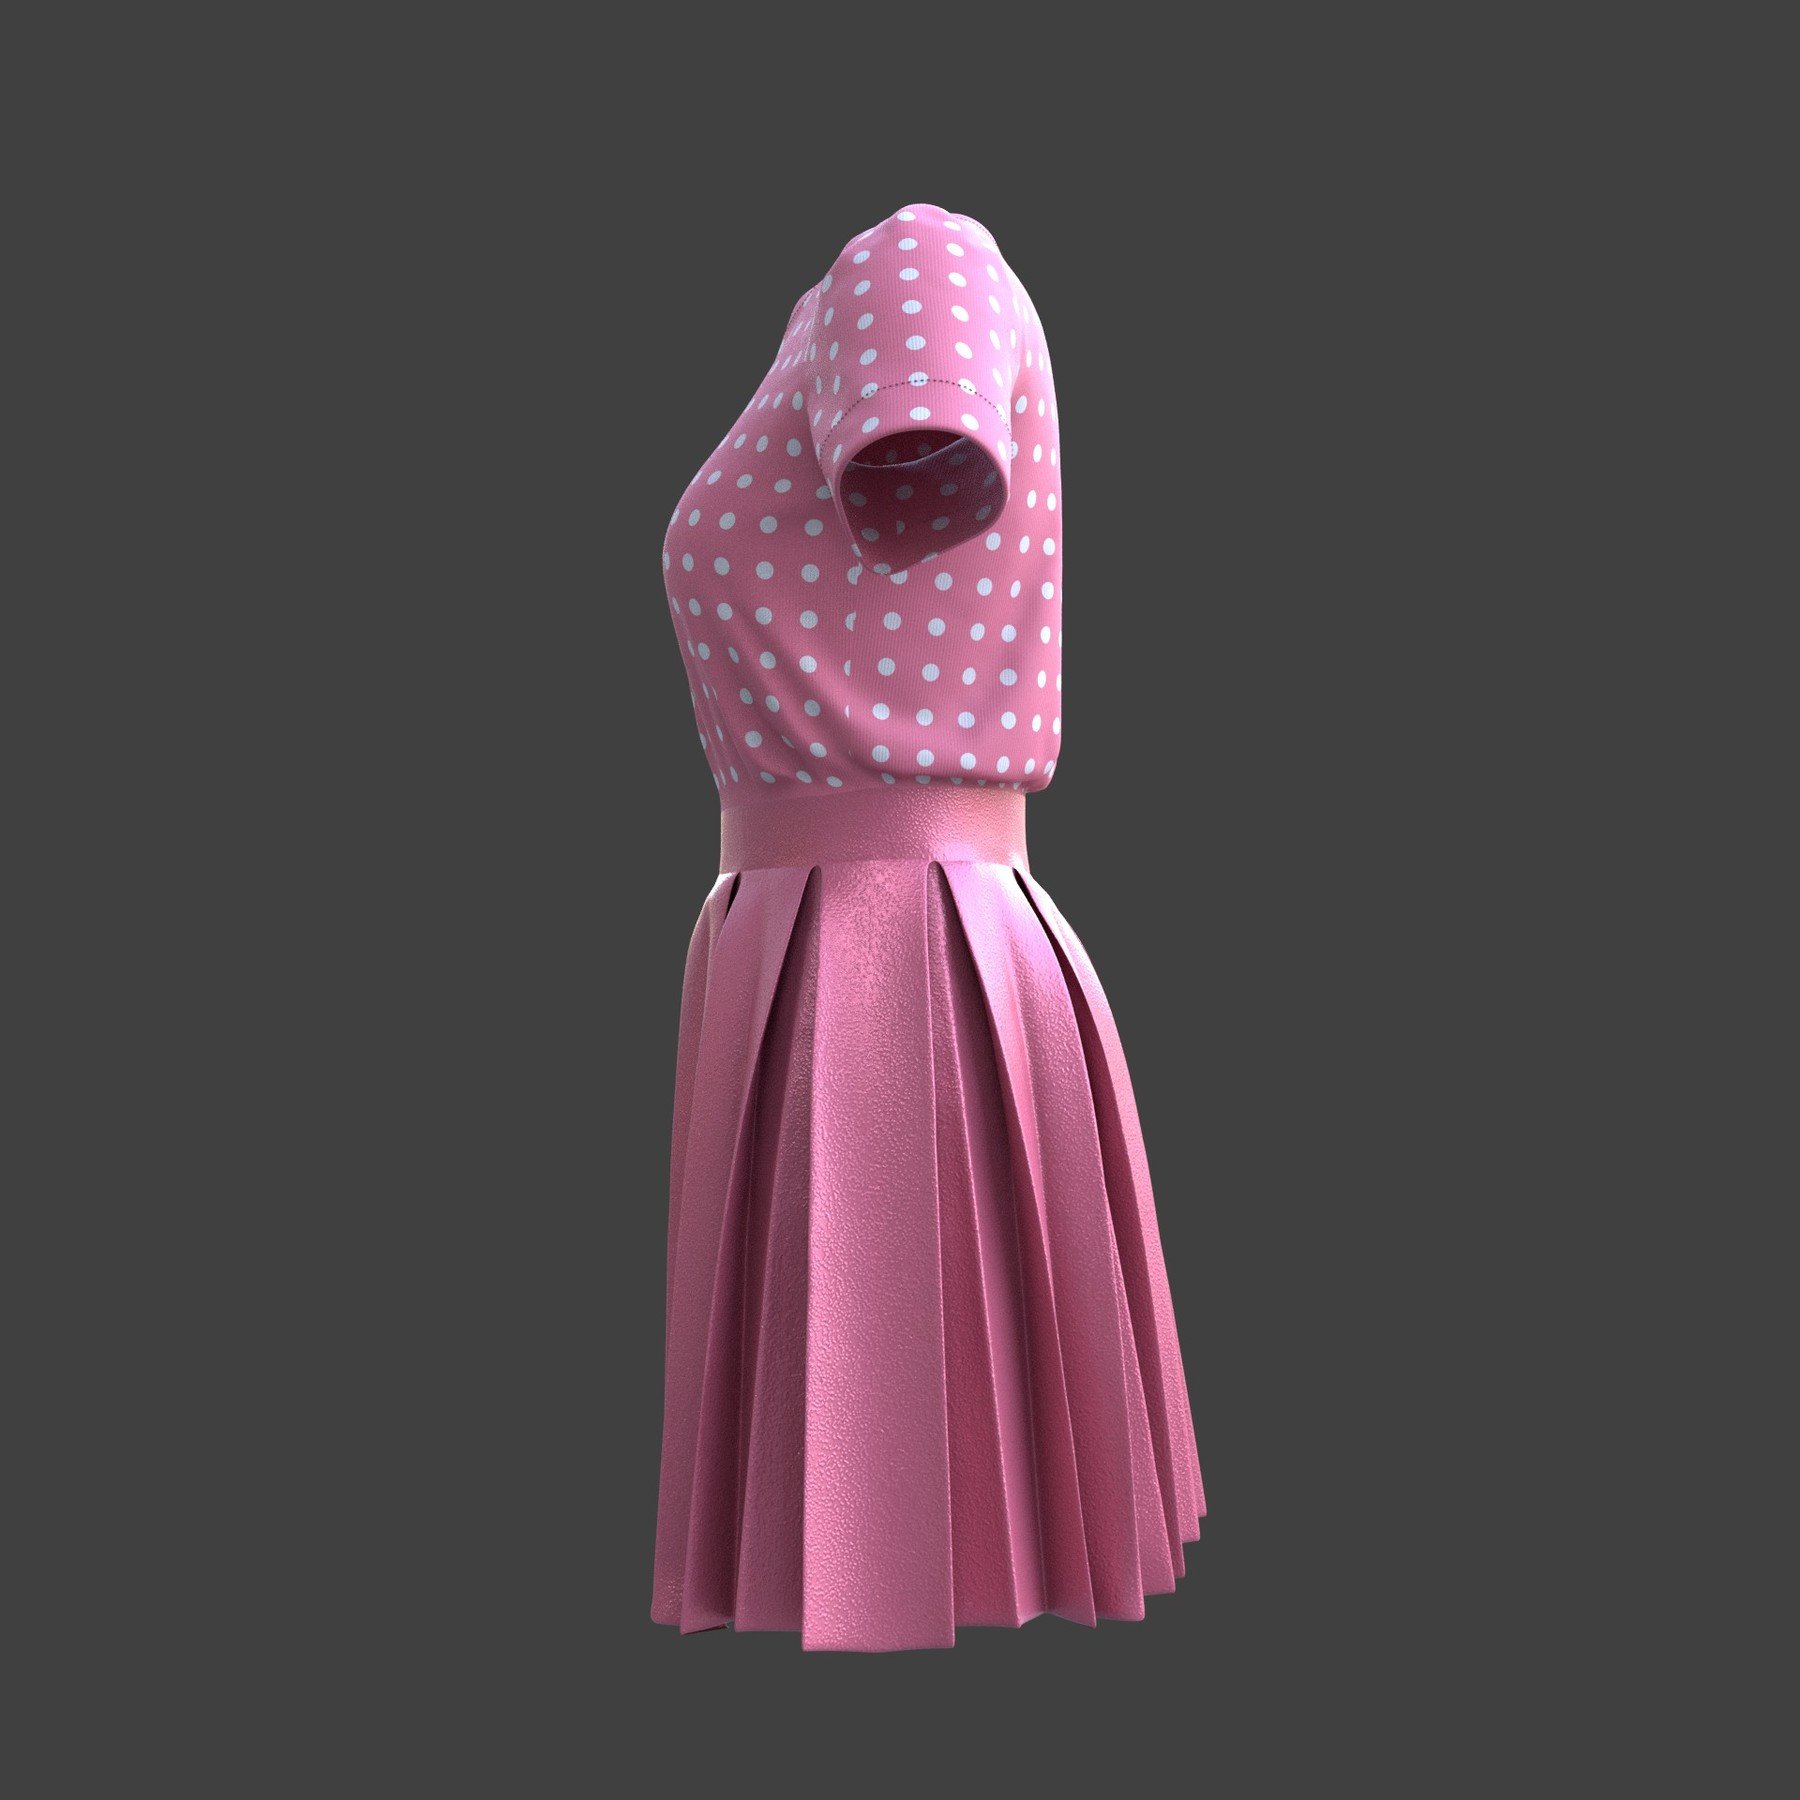 ArtStation - 3D pleated dress -skirt and top | Resources